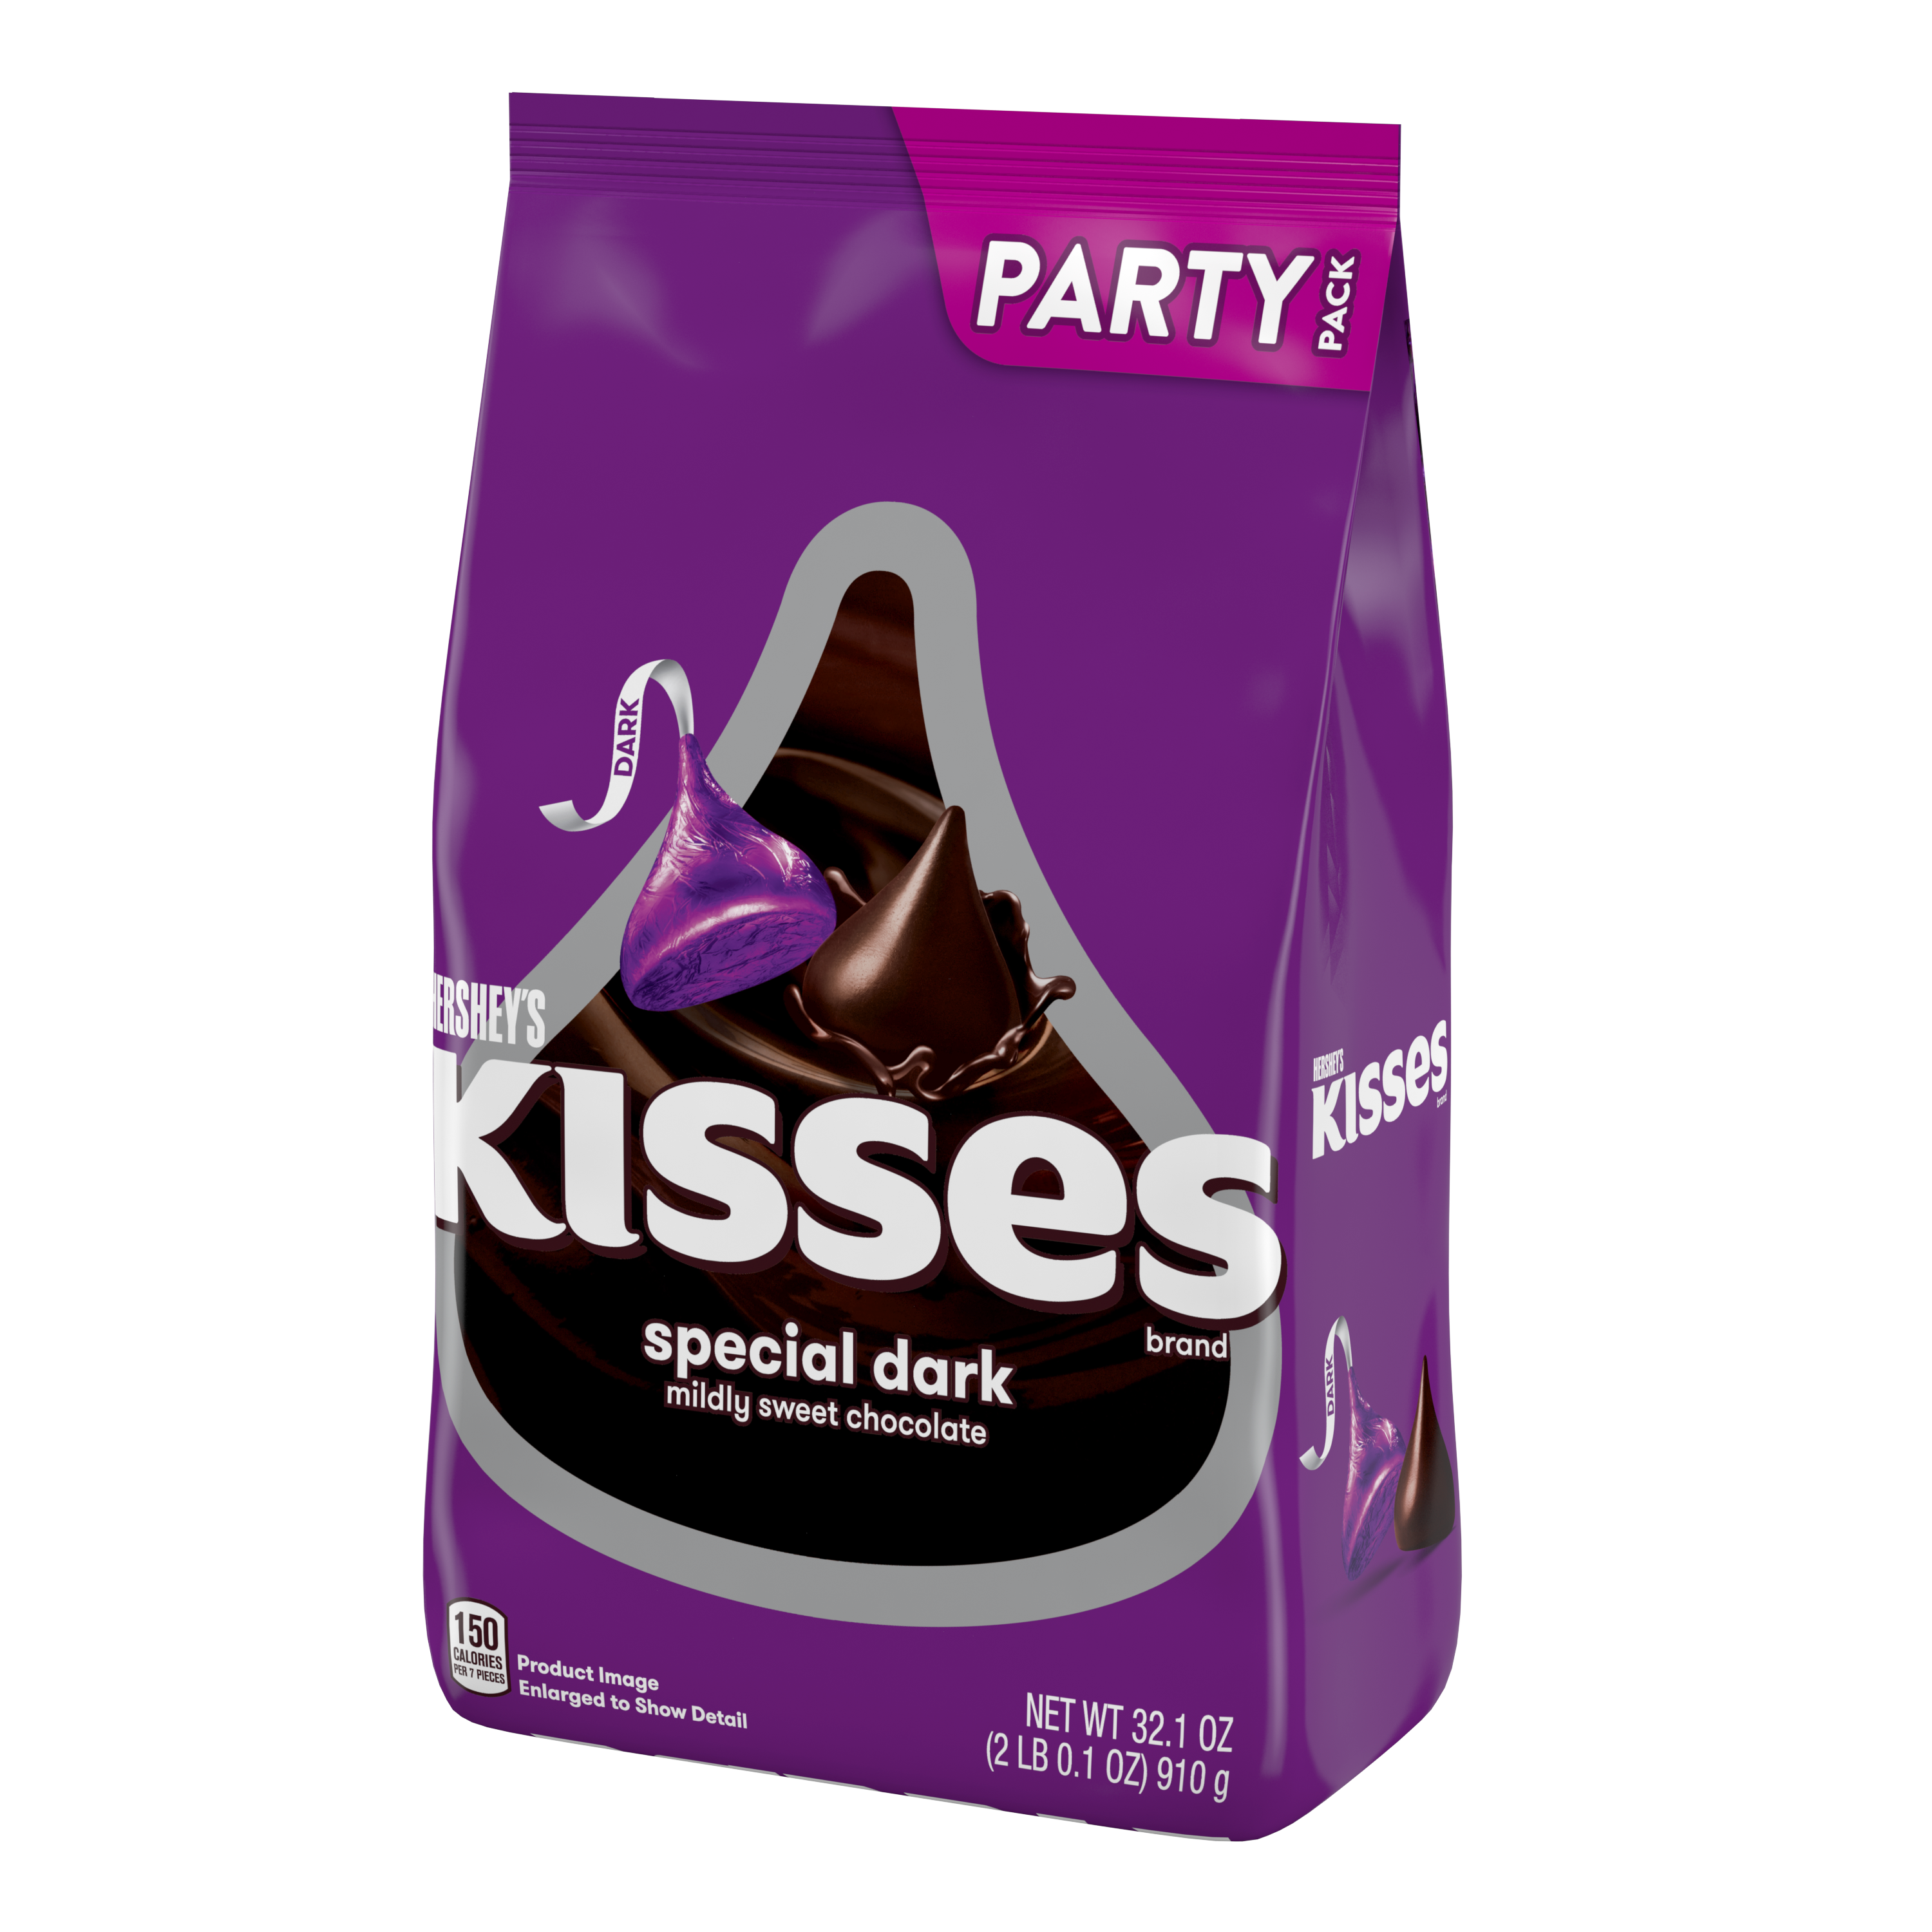 HERSHEY'S KISSES SPECIAL DARK Mildly Sweet Chocolate Candy, 32.1 oz pack - Right Side of Package